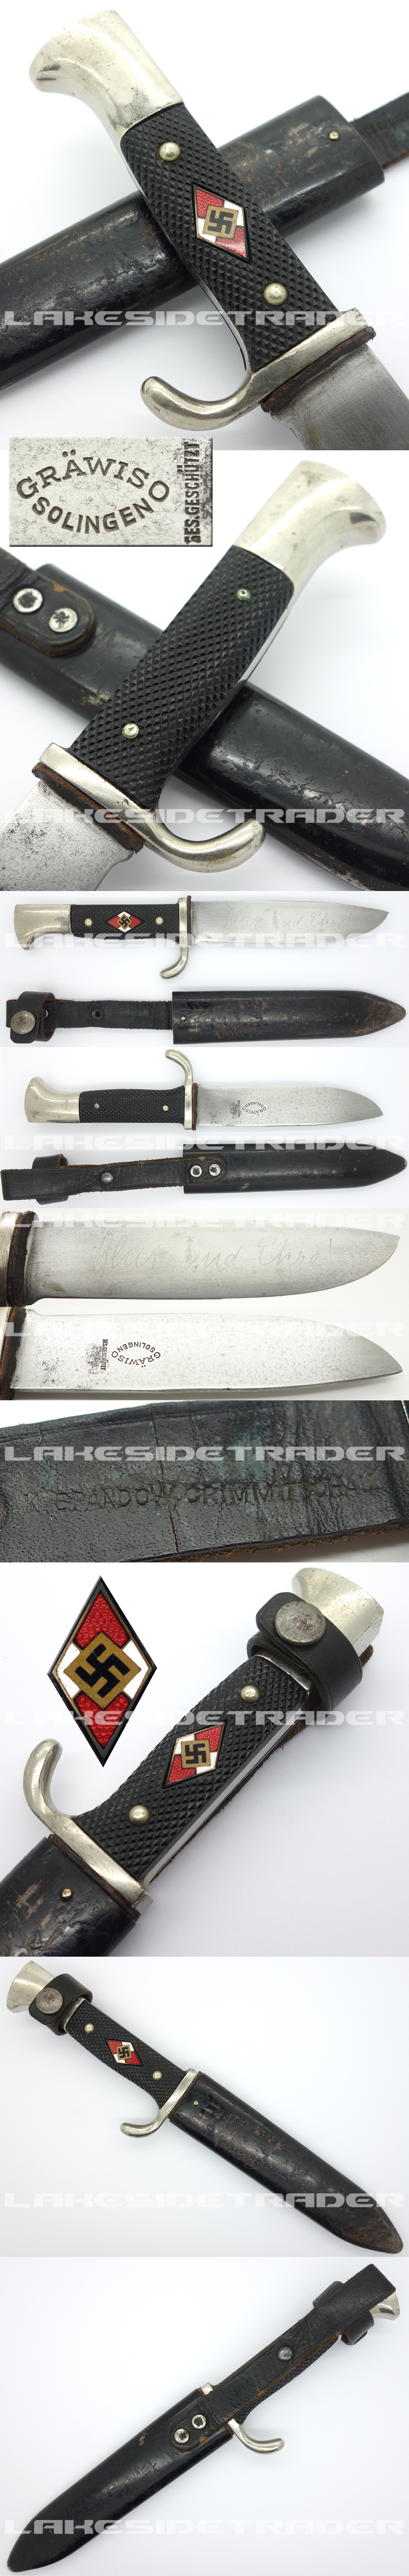 Early Hitler Youth Knife by Grawiso